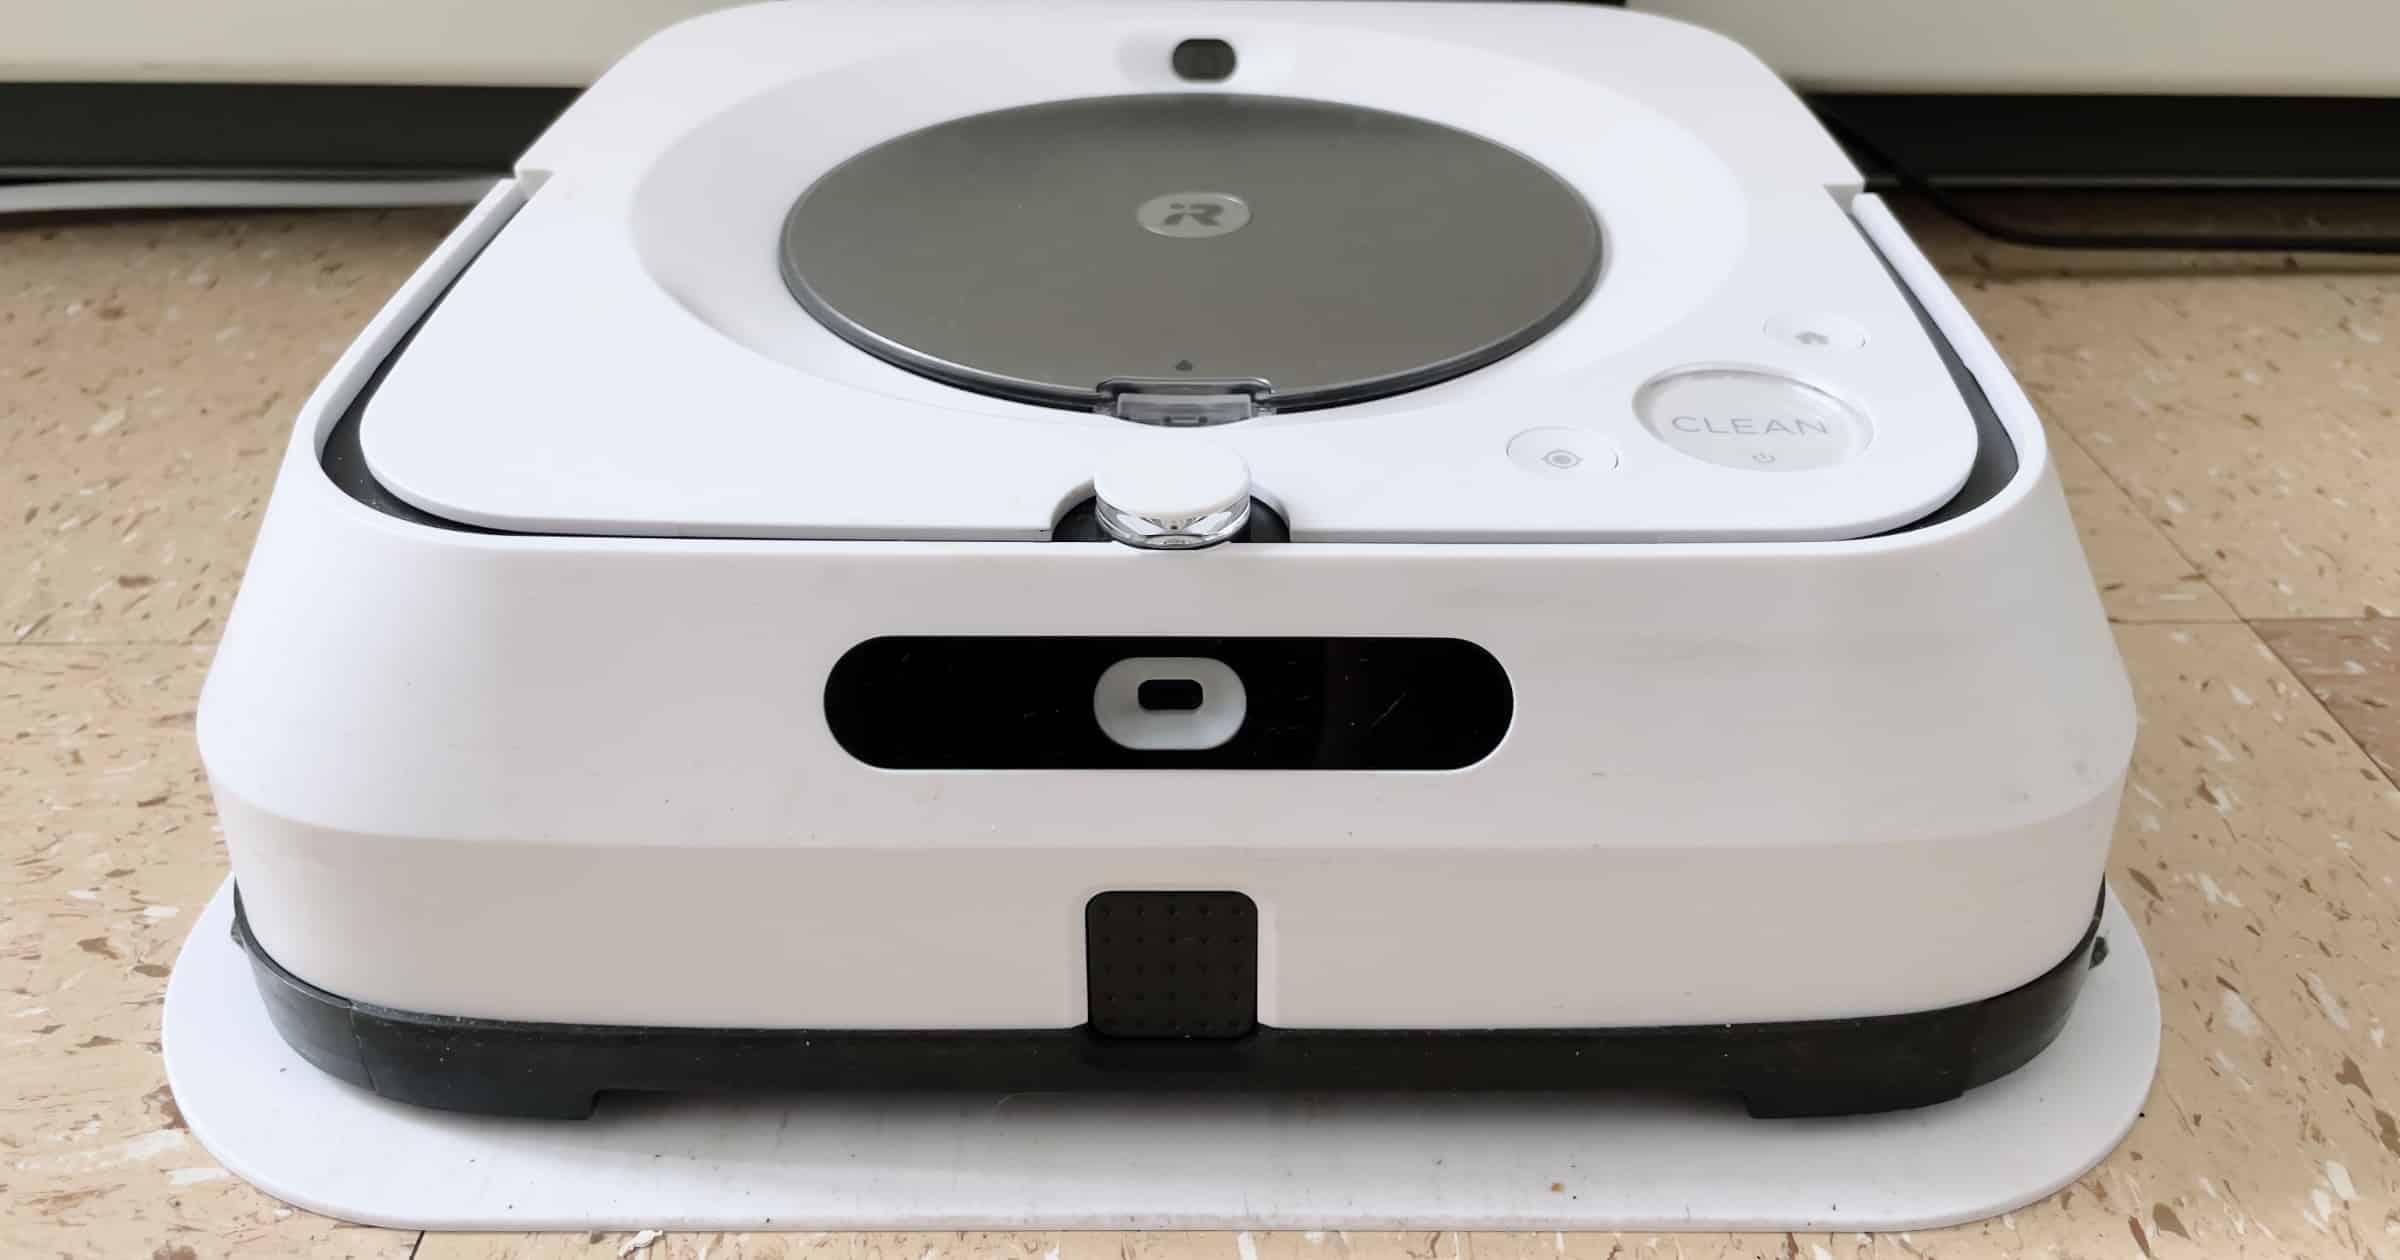 Review: iRobot's Braava Jet M6 is a Thorough Creature - The Mac